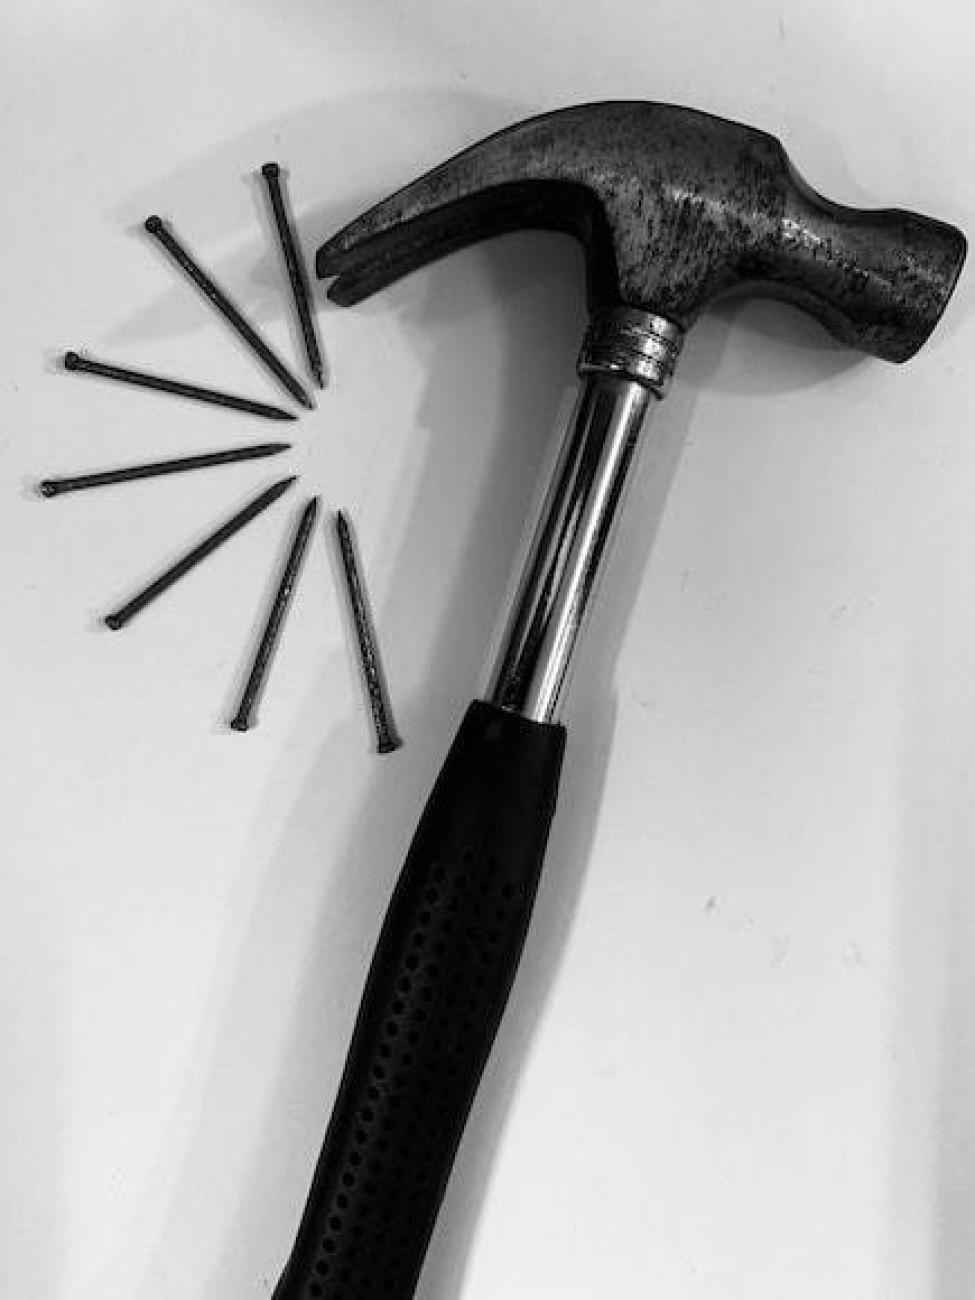 Hammer Striking Nail Photograph by Tom Branch - Pixels